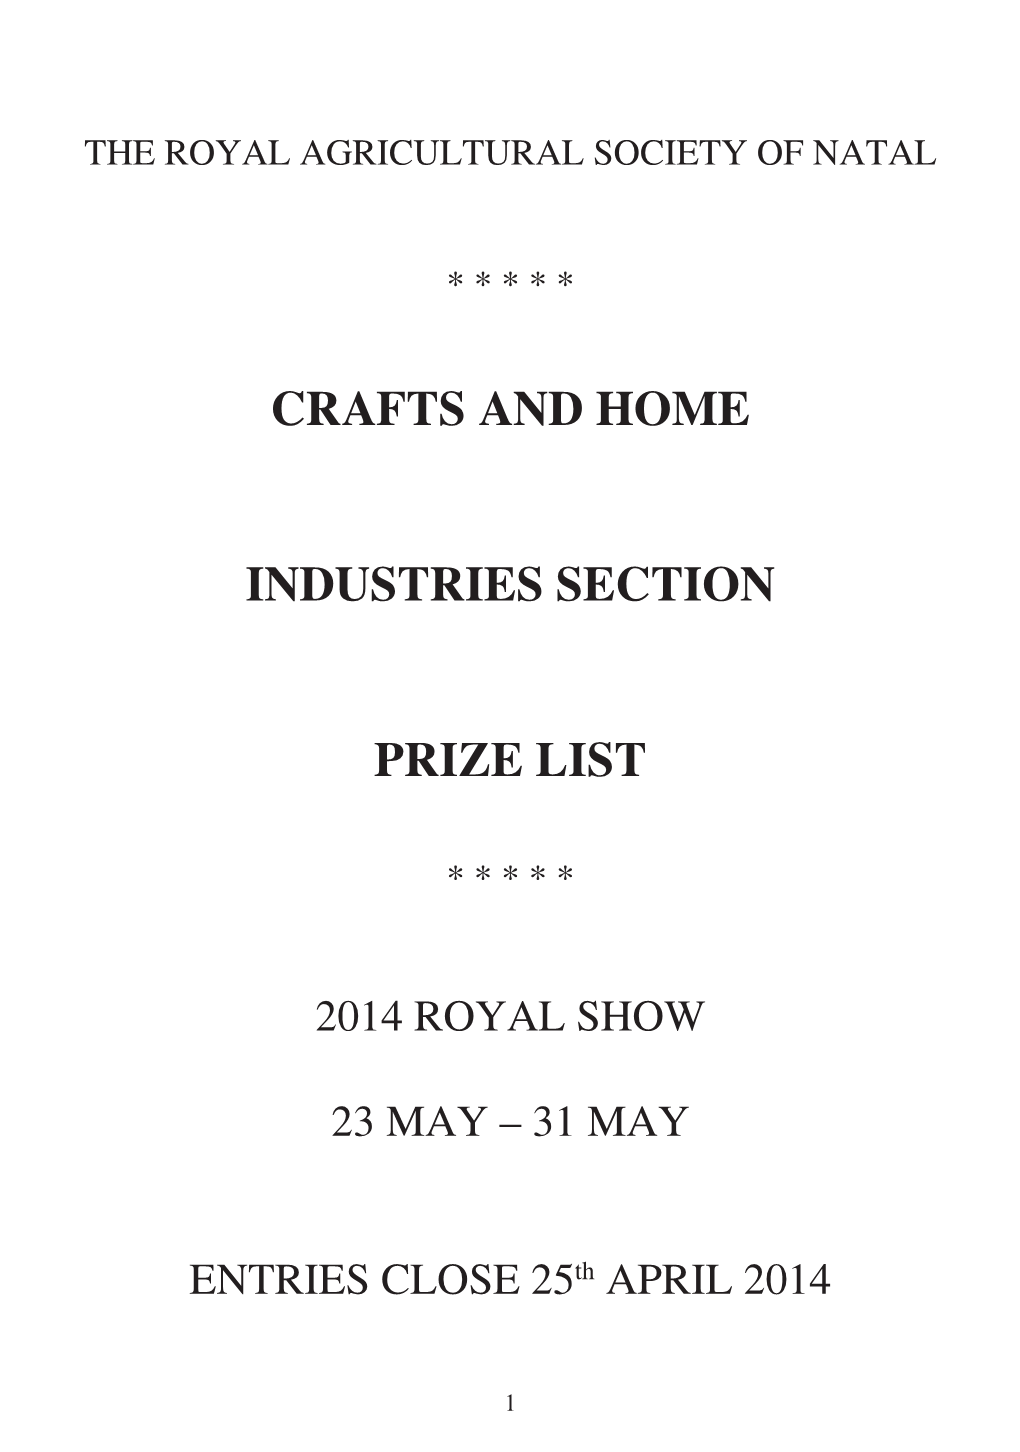 Crafts and Home Industries Section Prize List